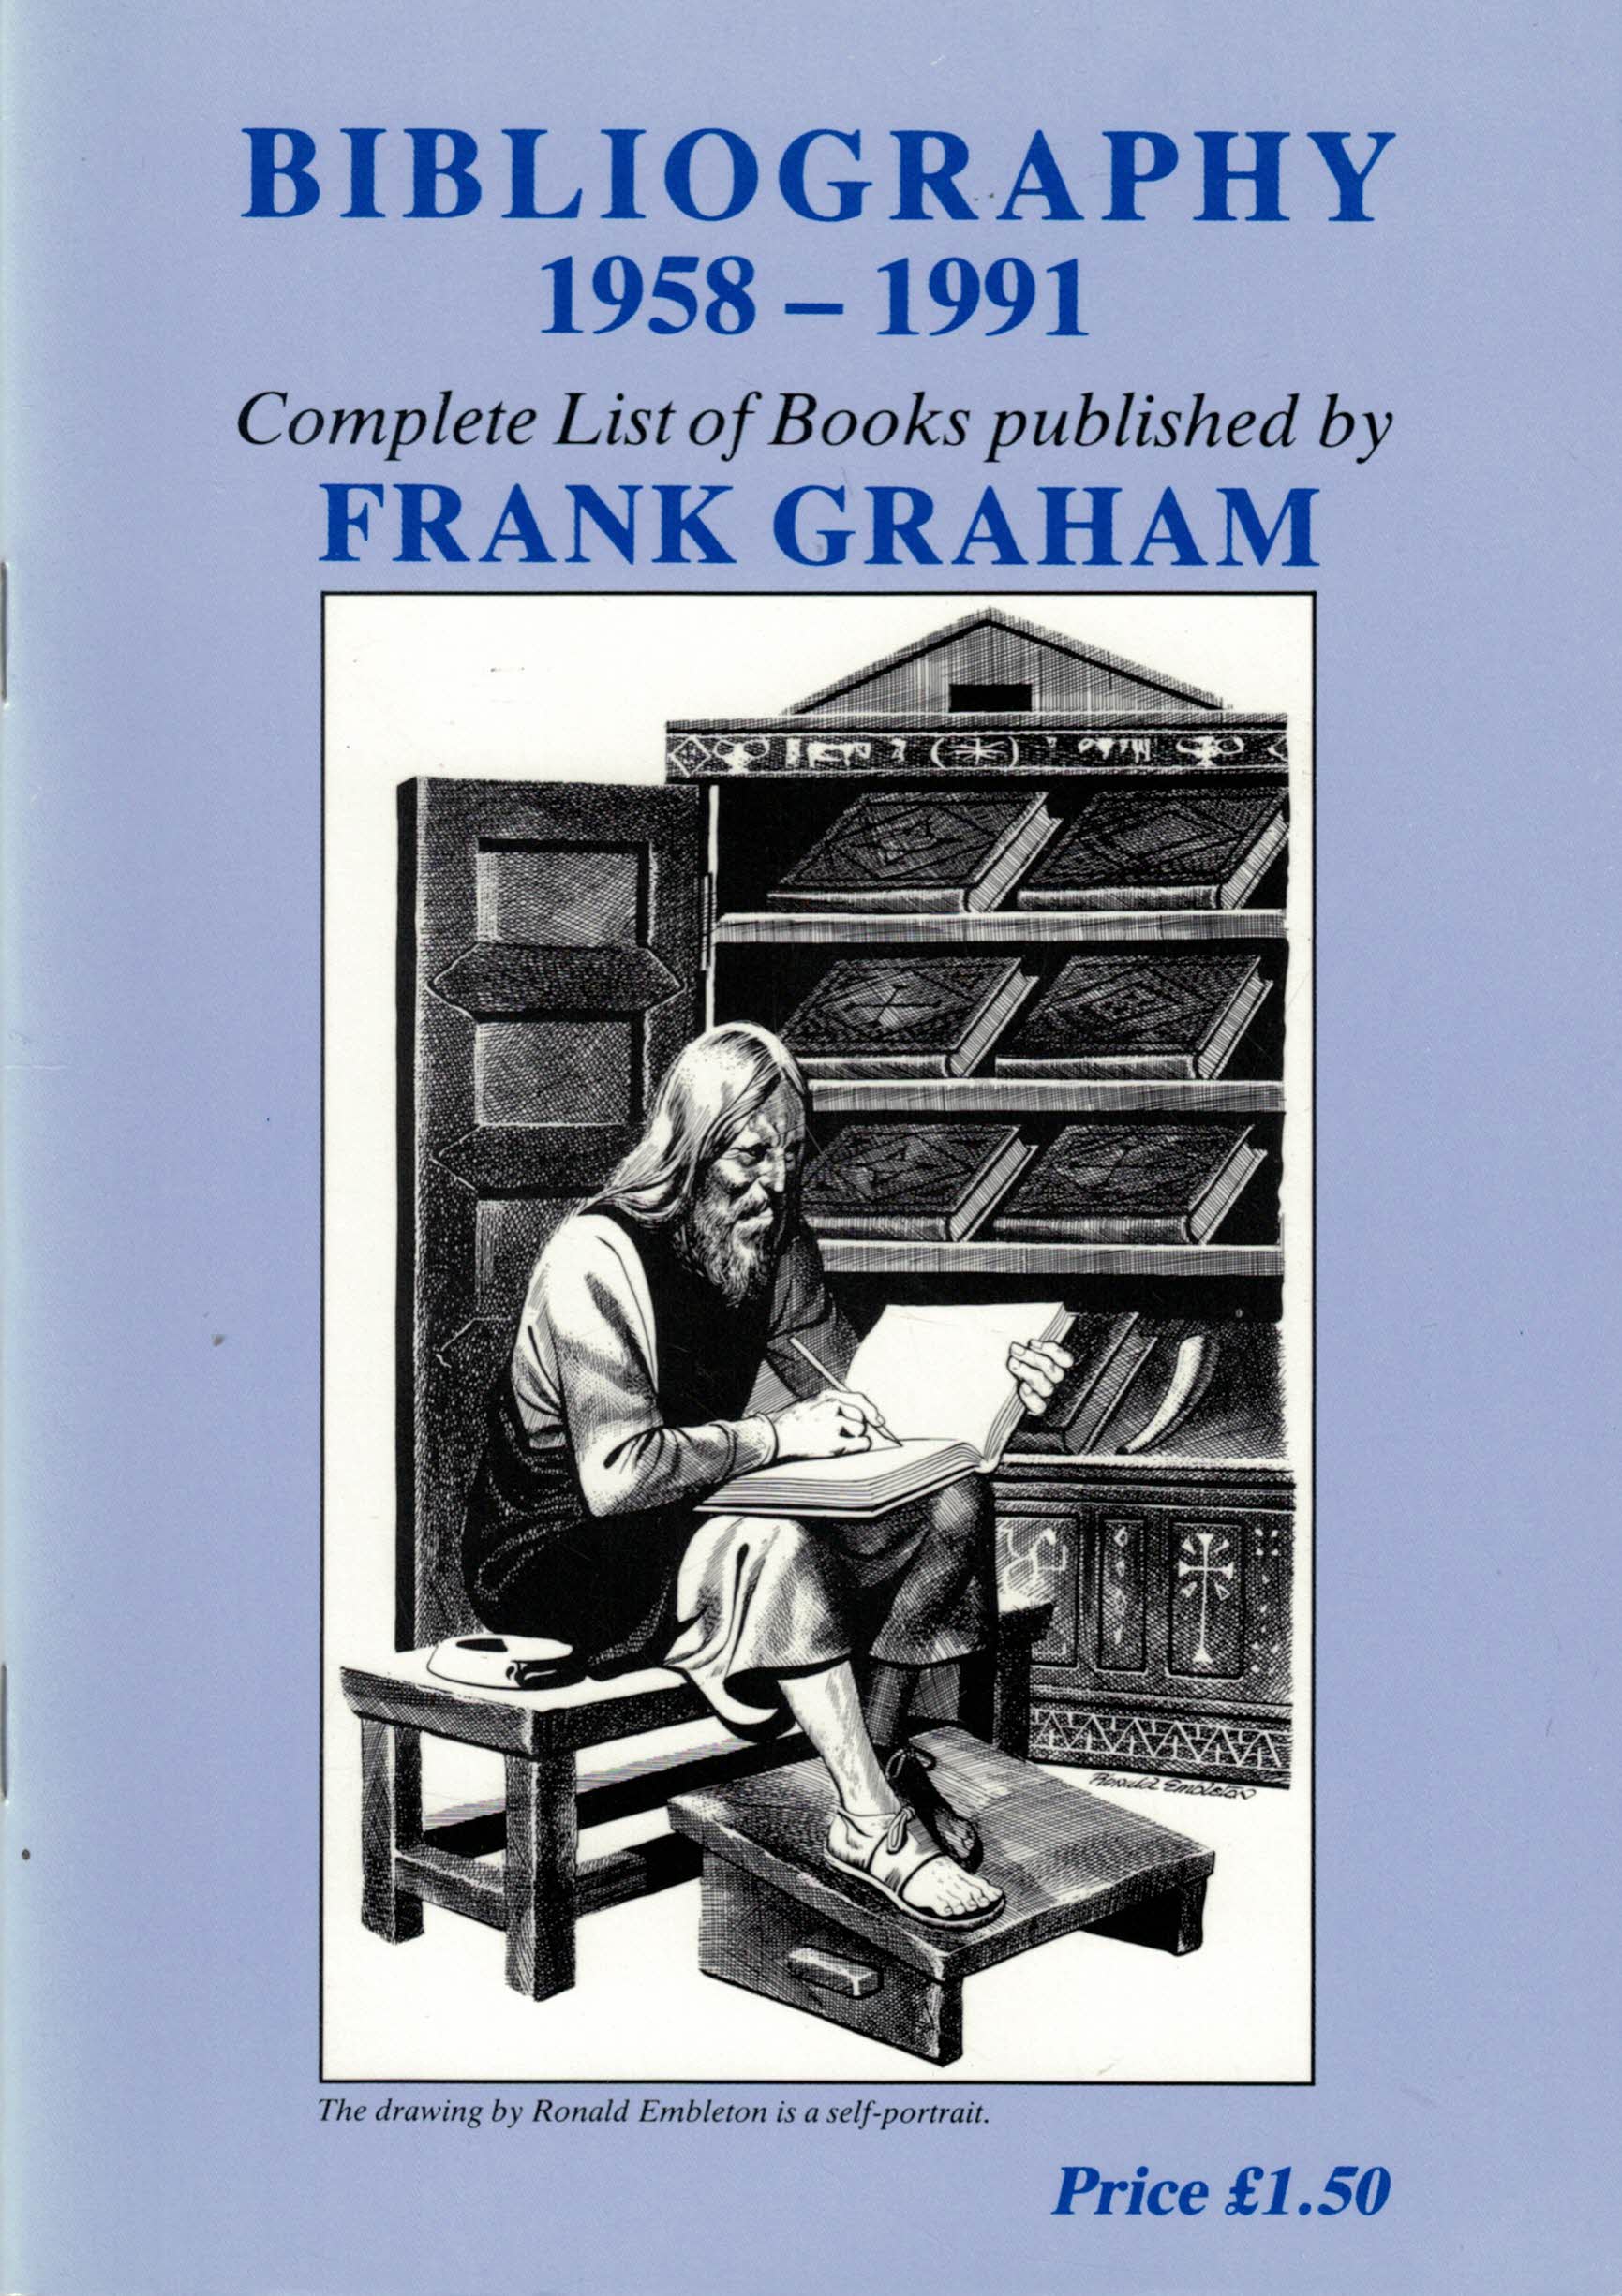 Bibliography 1958-1991. Complete List of Books Published by Frank Graham.